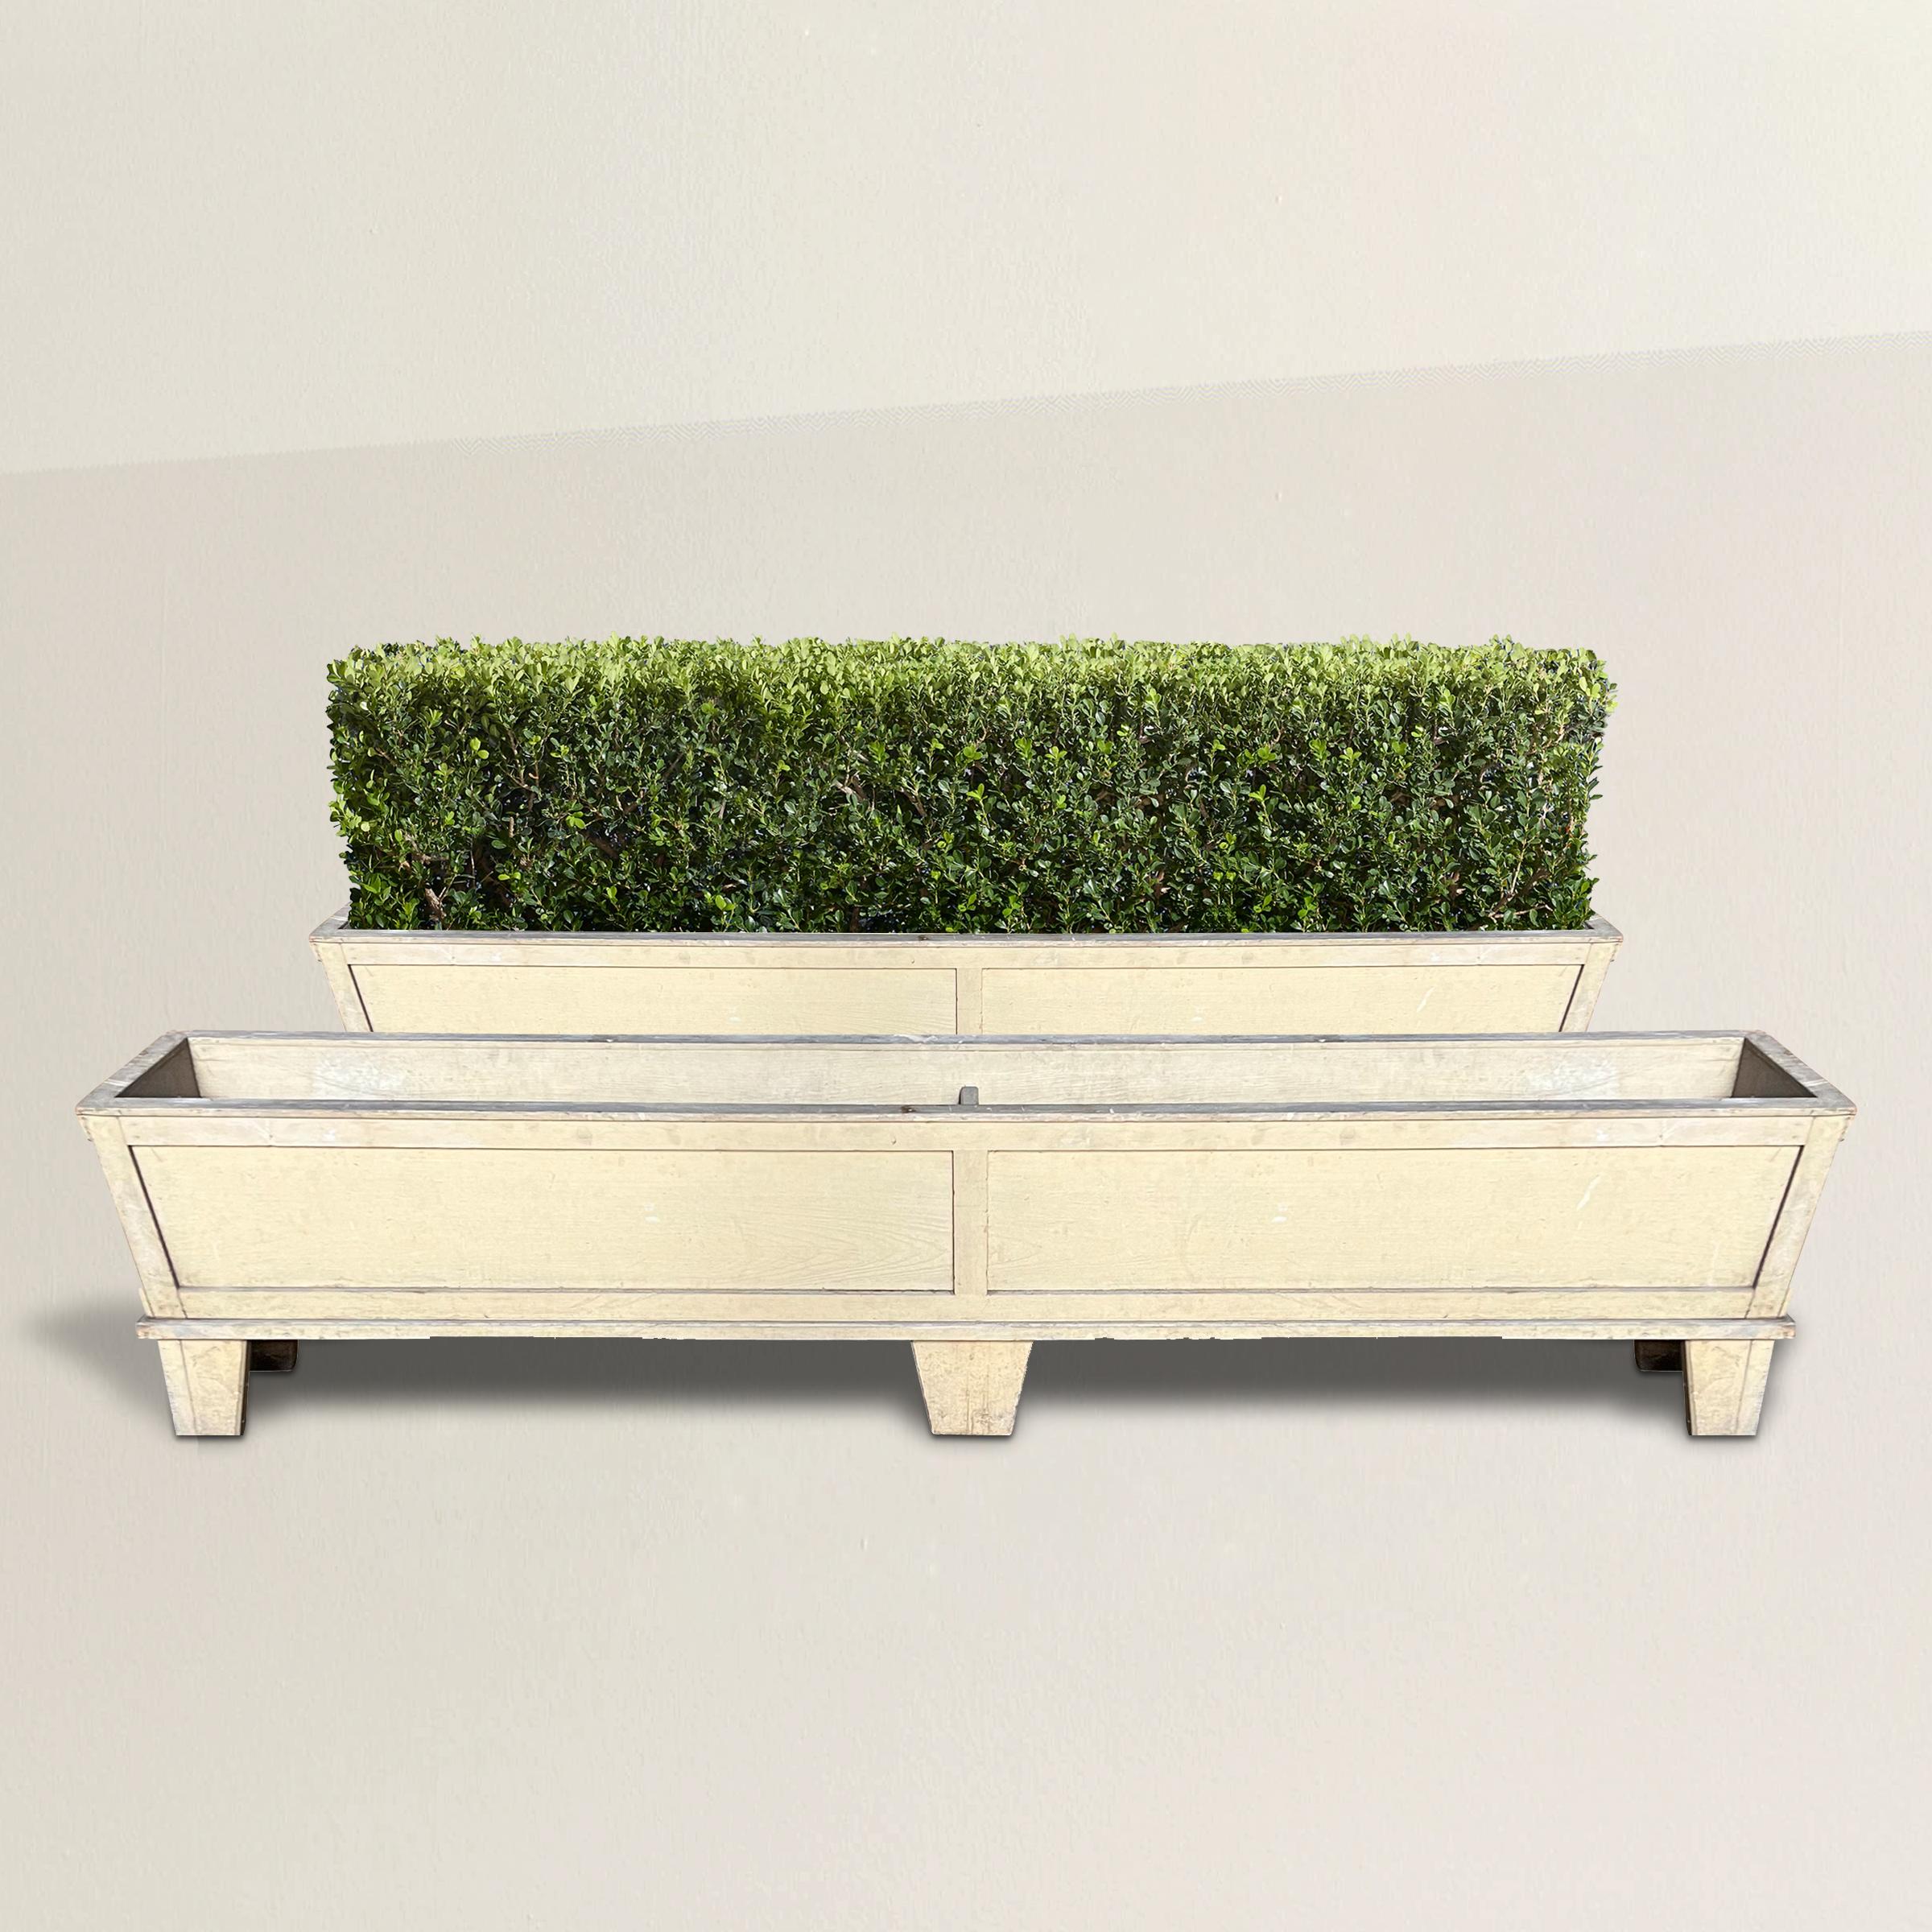 A pair of simple yet chic pair of 20th century English wood planters with tapered paneled sides with chamfered edges, and finished in a pale yellow paint. Perfect for flanking your patio or porch, or used indoors to grow herbs near your kitchen.